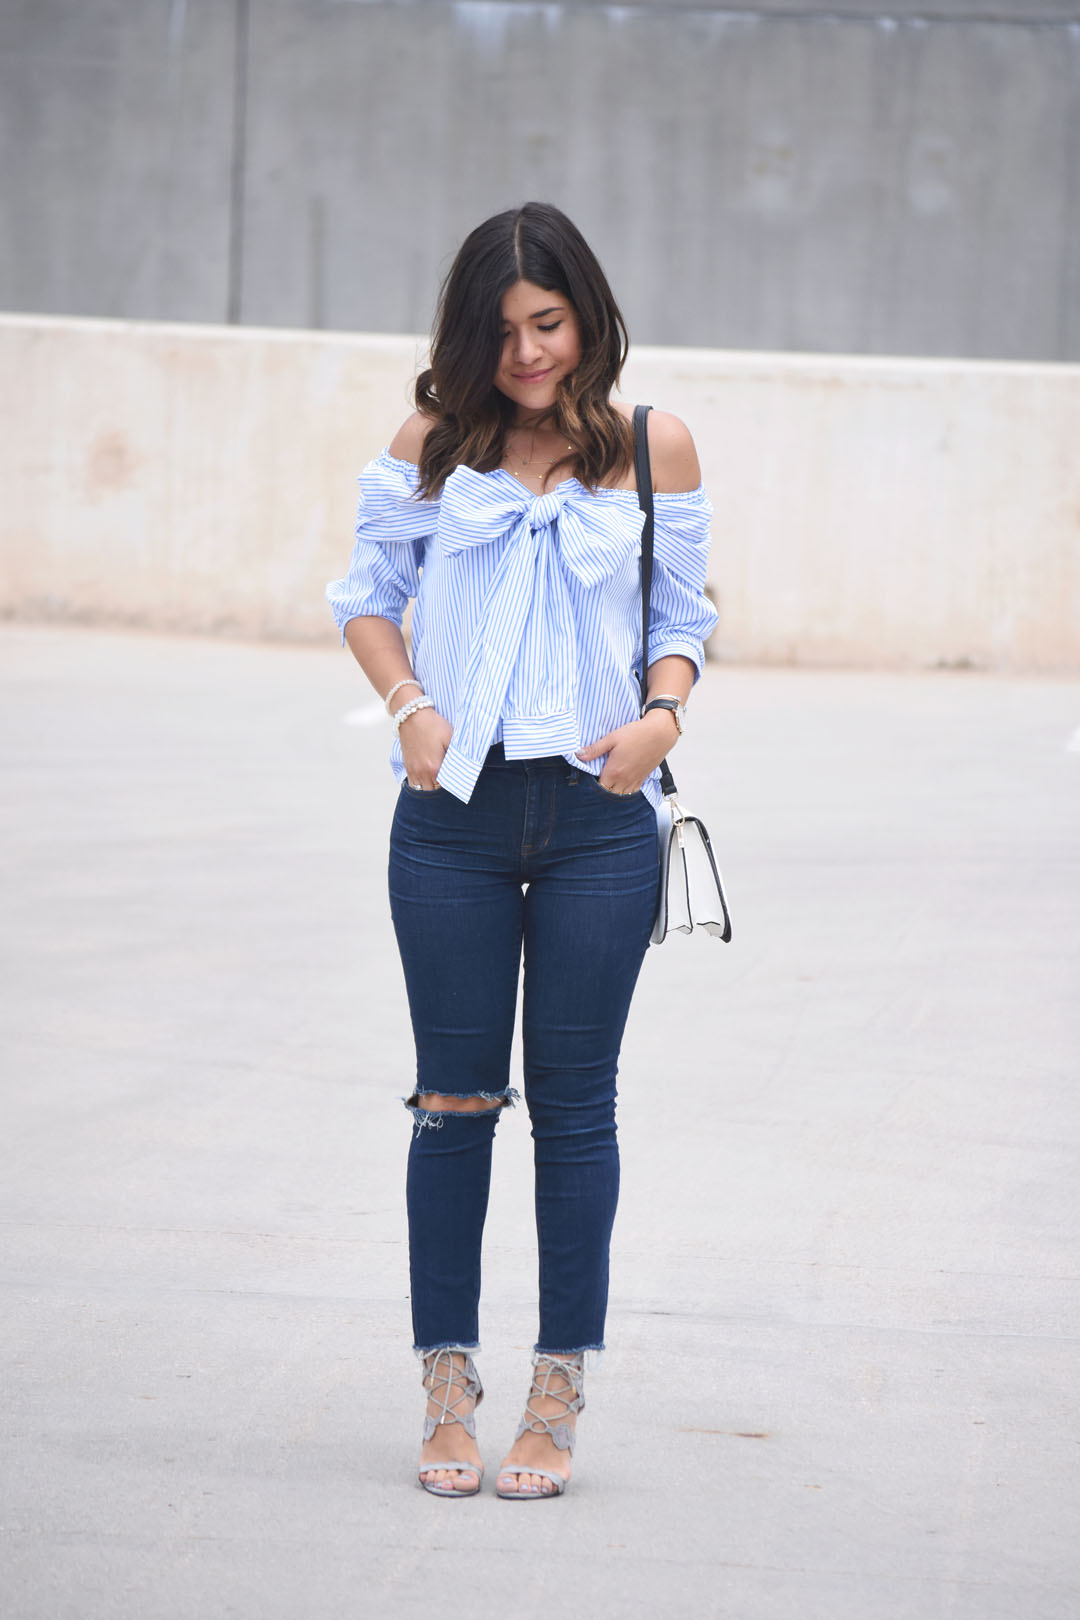 Carolina Hellal of the fashion blog Chic Talk wearing a SheIn tie front off the shoulders blouse, Madewell ripped jeans, and Public Desire grey sandals